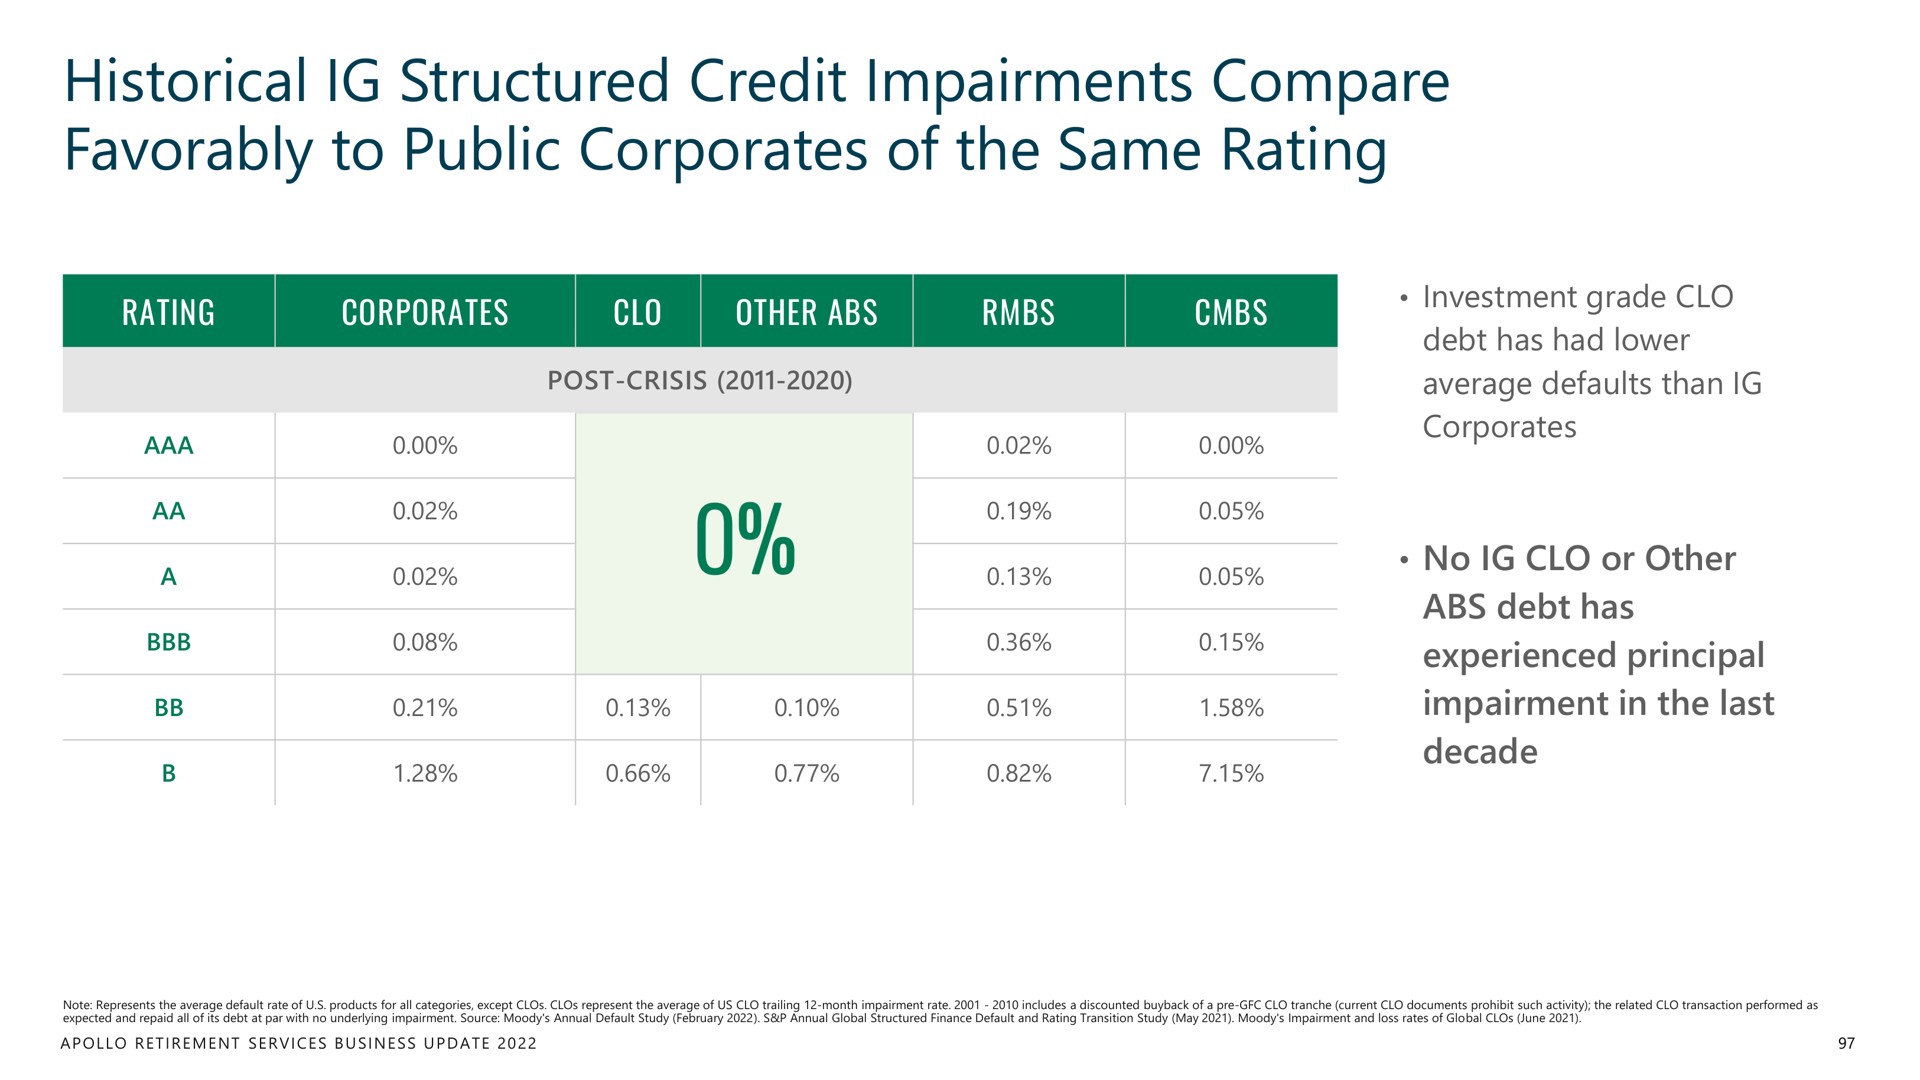 historical structured credit impairments compare favorably to public of the same rating | Apollo Global Management